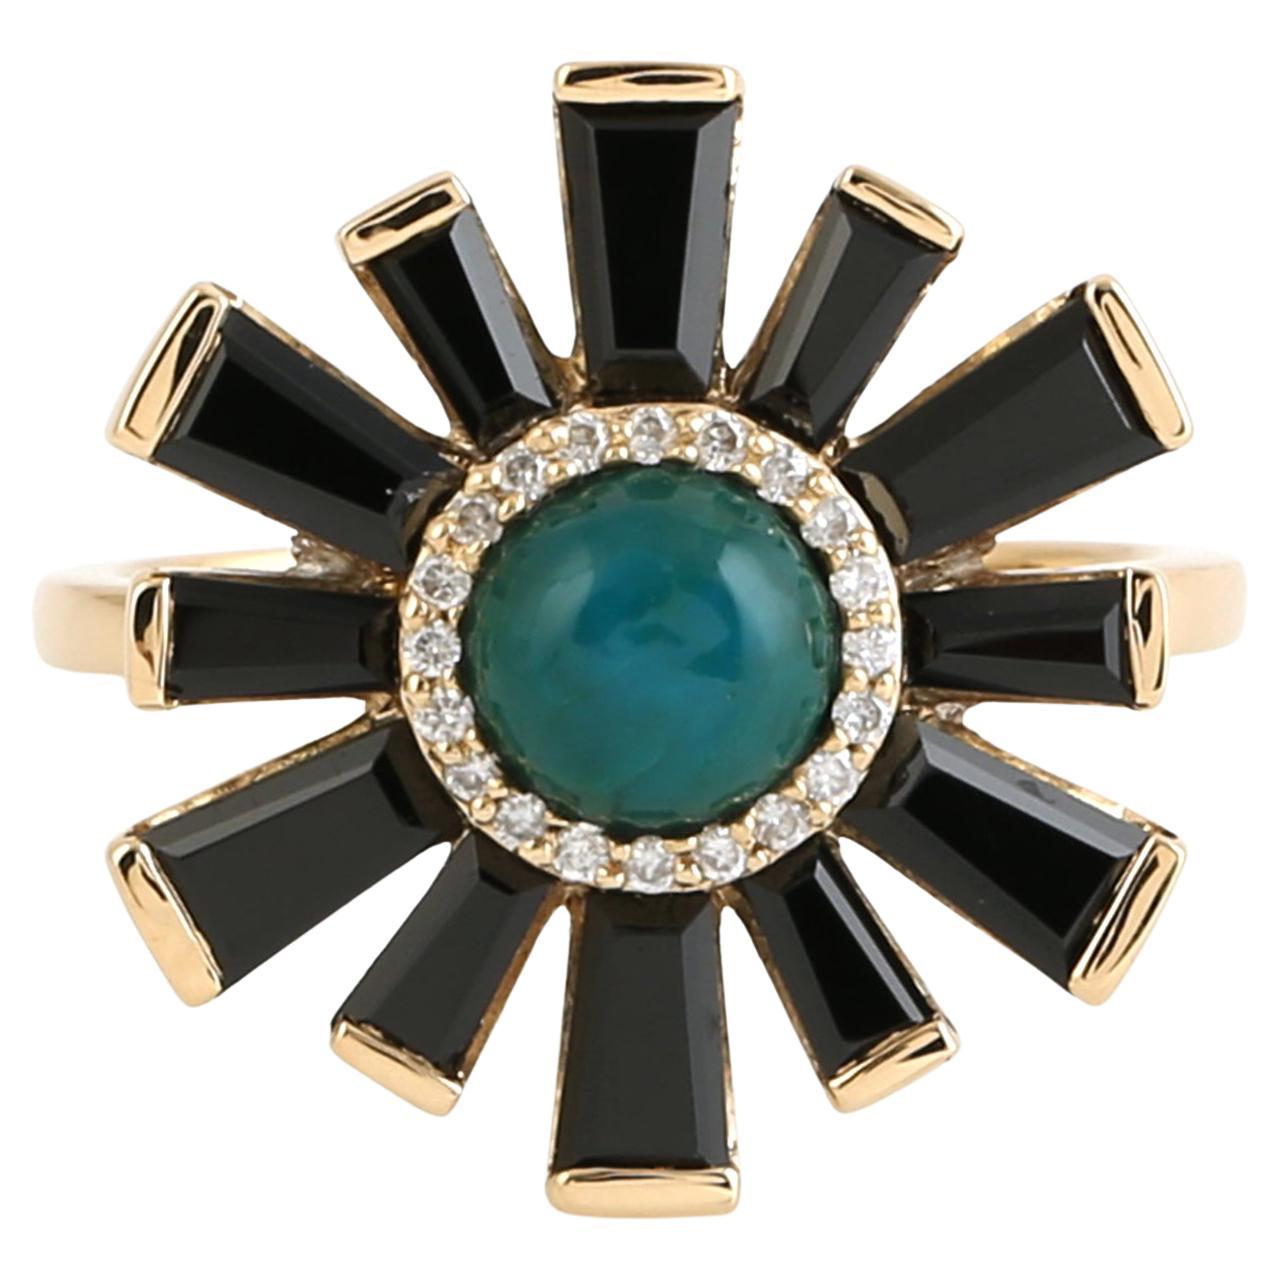 Baguette Shaped Spinel Ring With Round Chrysoprase Made in 18K Yellow Gold For Sale